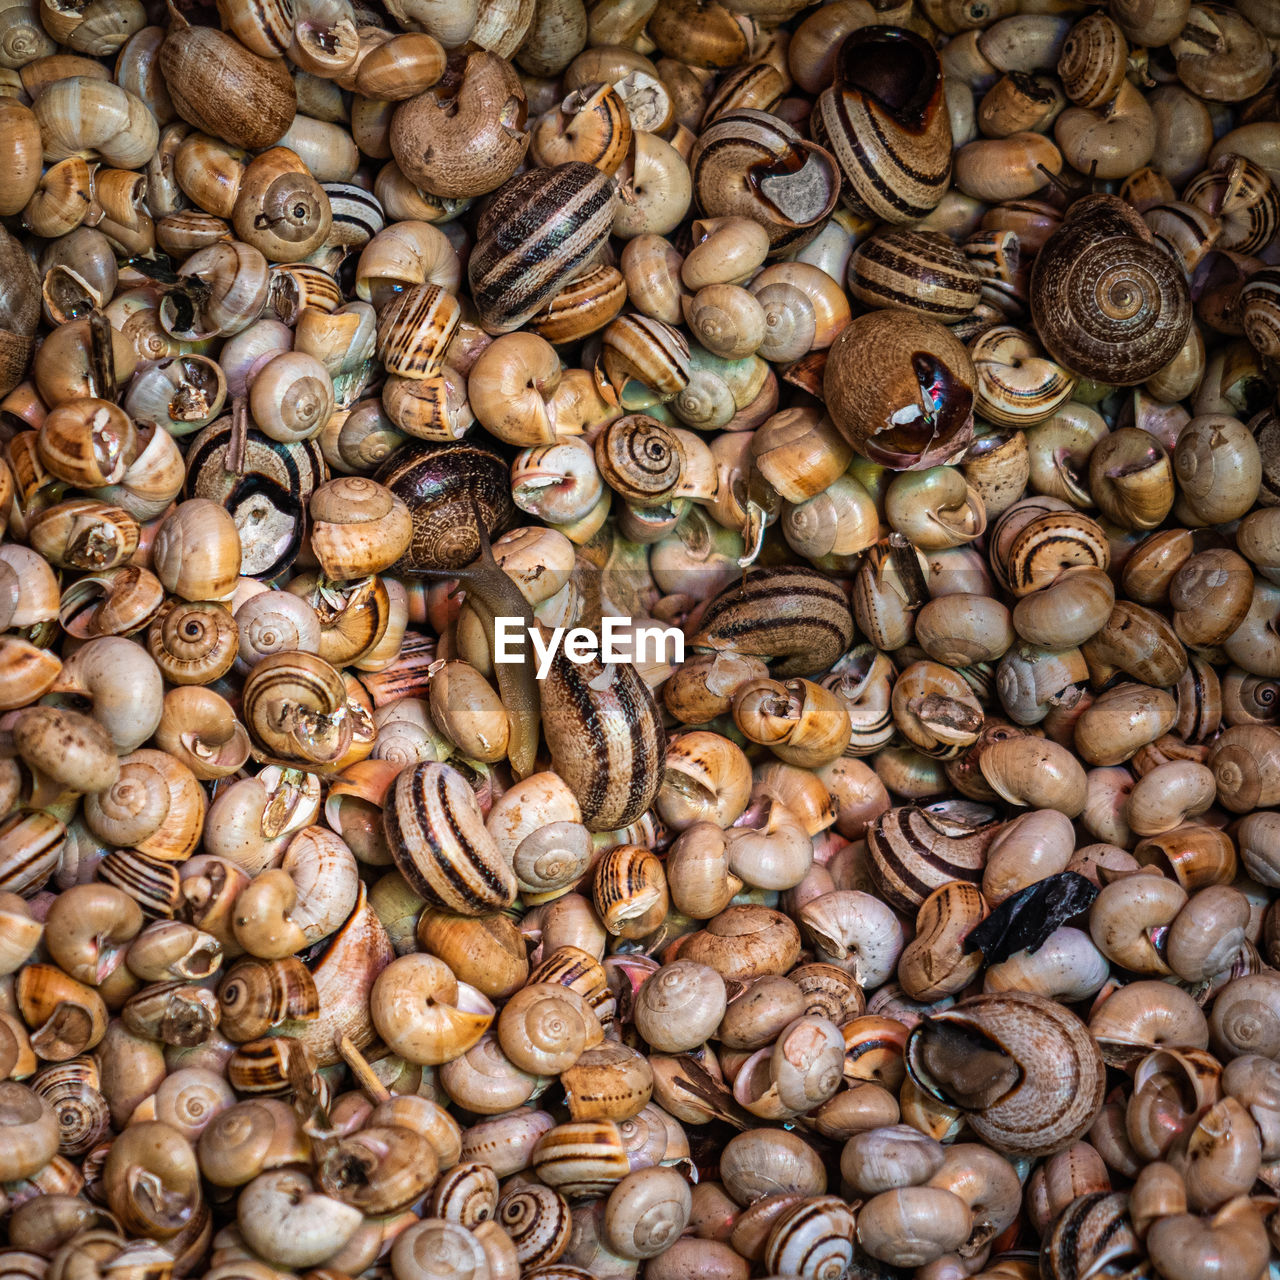 A close up of raw snails in shells alive for sale in the fish market